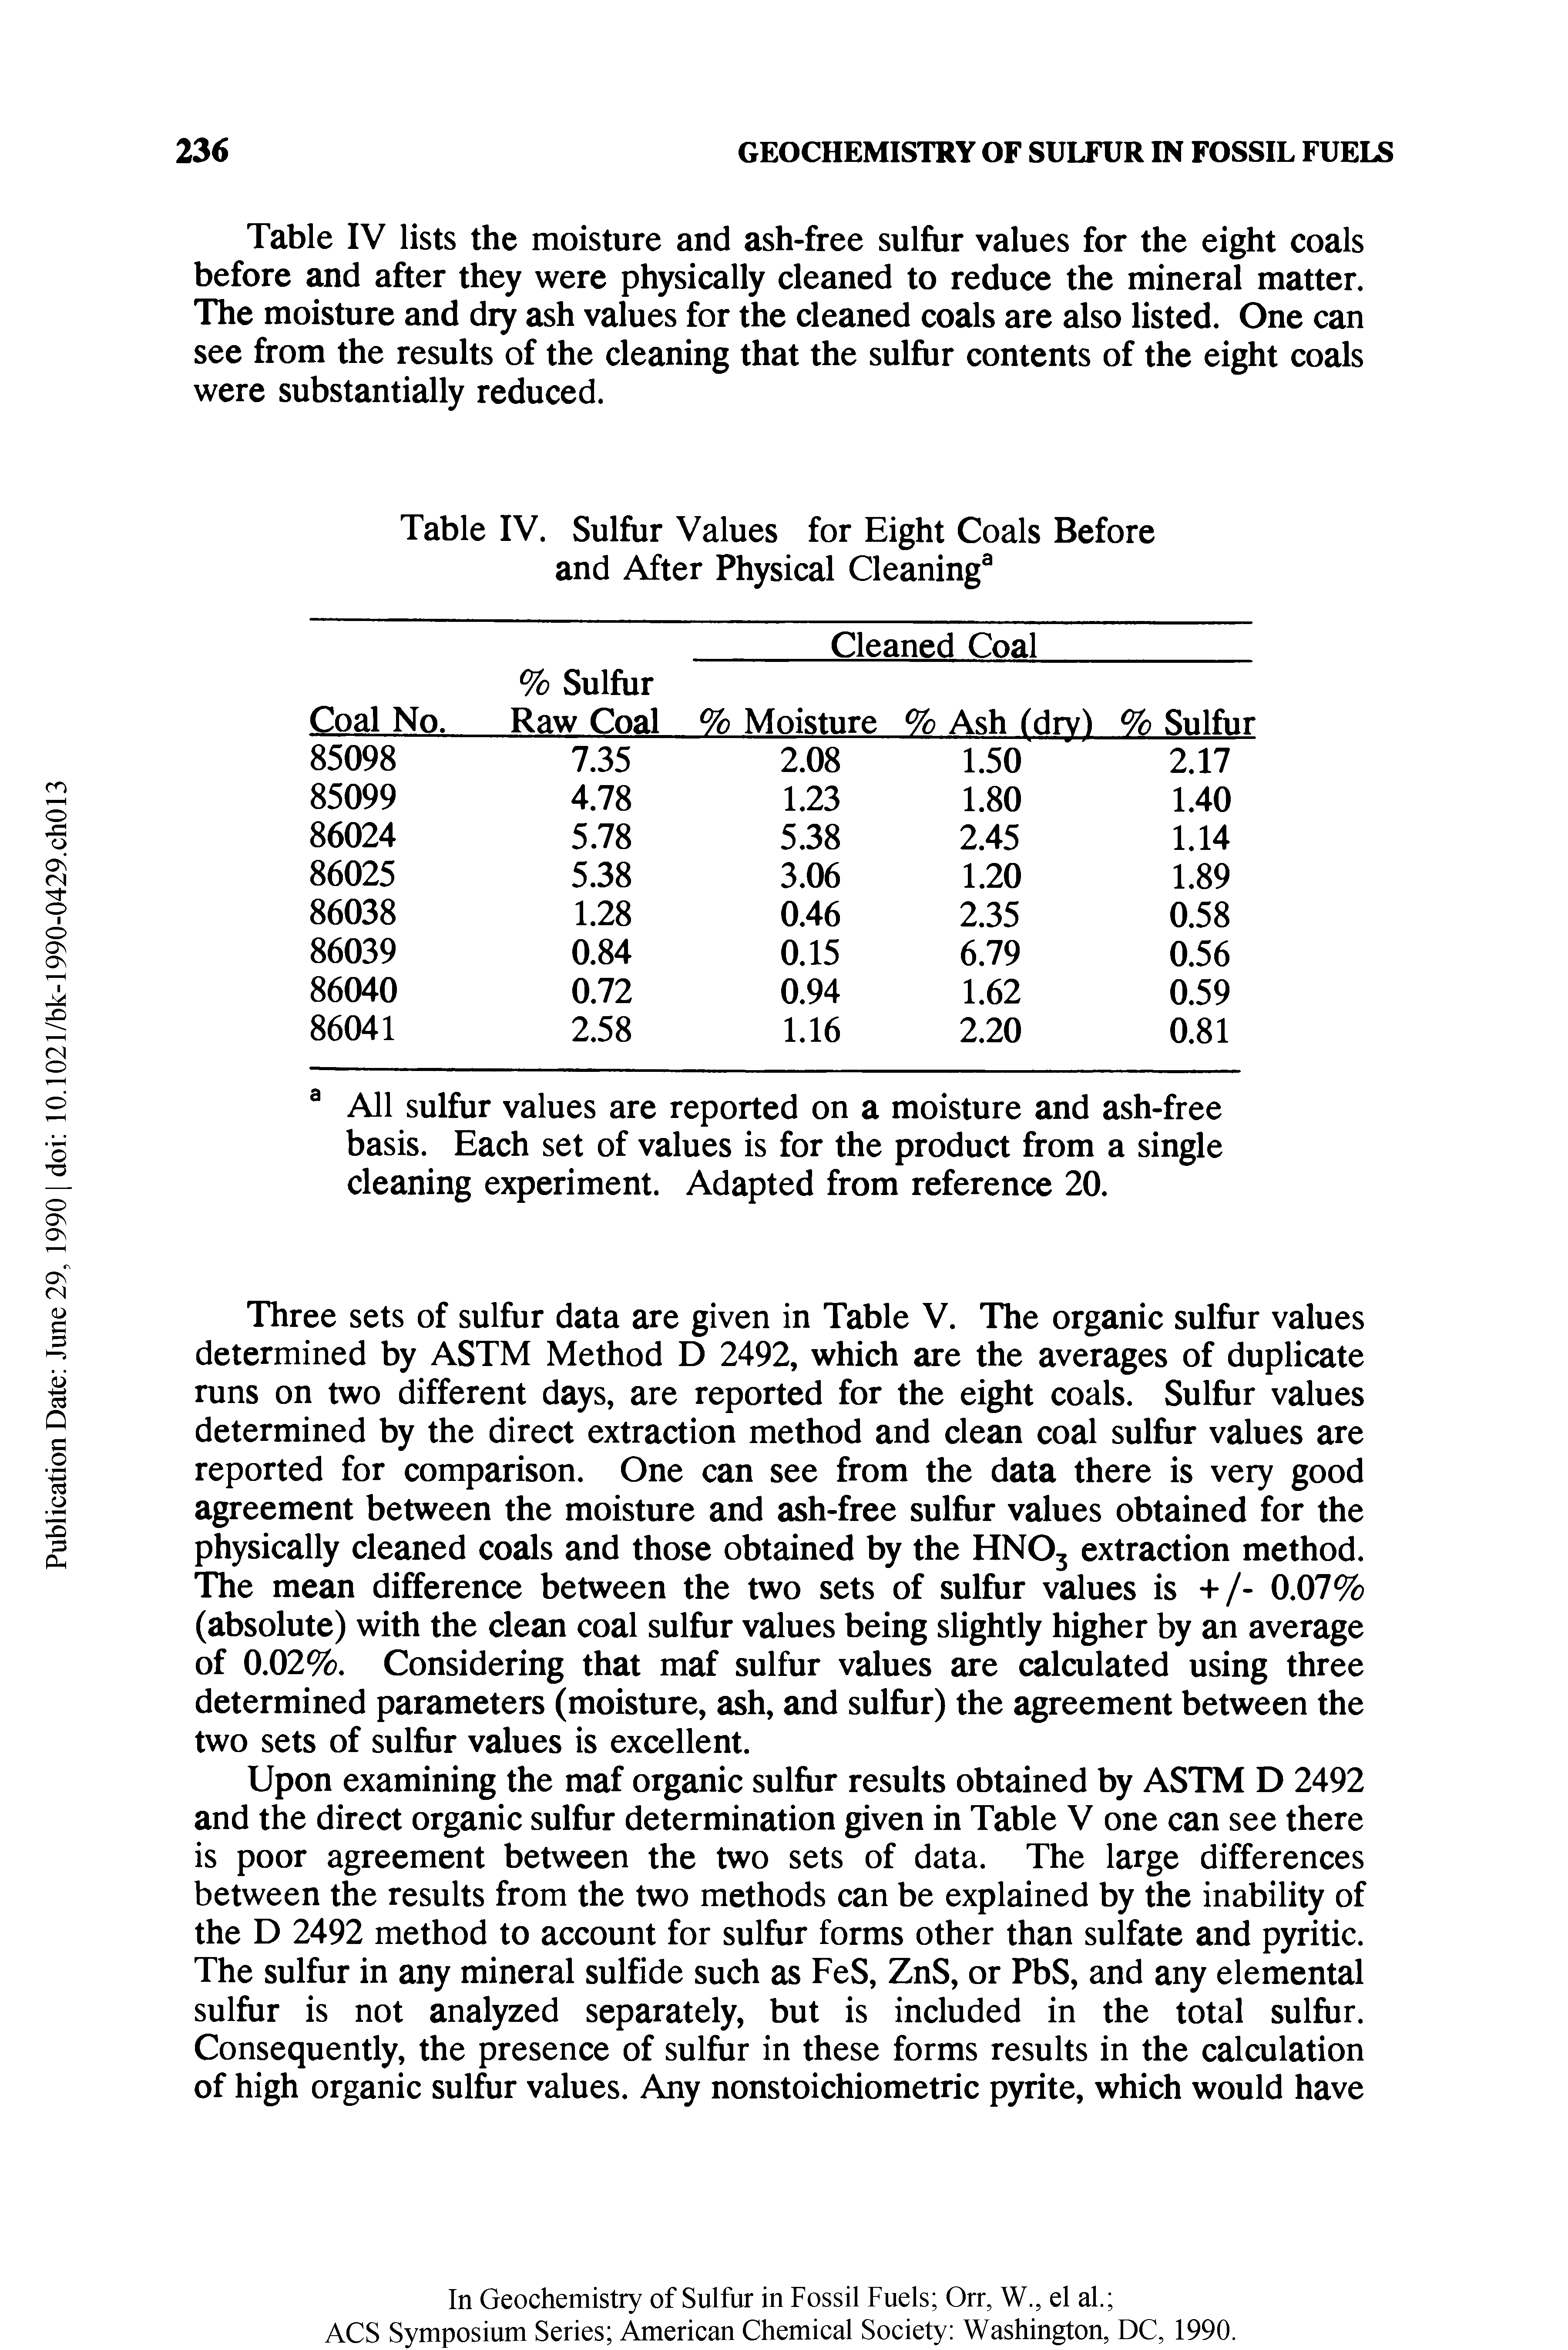 Table IV lists the moisture and ash-free sulfur values for the eight coals before and after they were physically cleaned to reduce the mineral matter. The moisture and dry ash values for the cleaned coals are also listed. One can see from the results of the cleaning that the sulfur contents of the eight coals were substantially reduced.